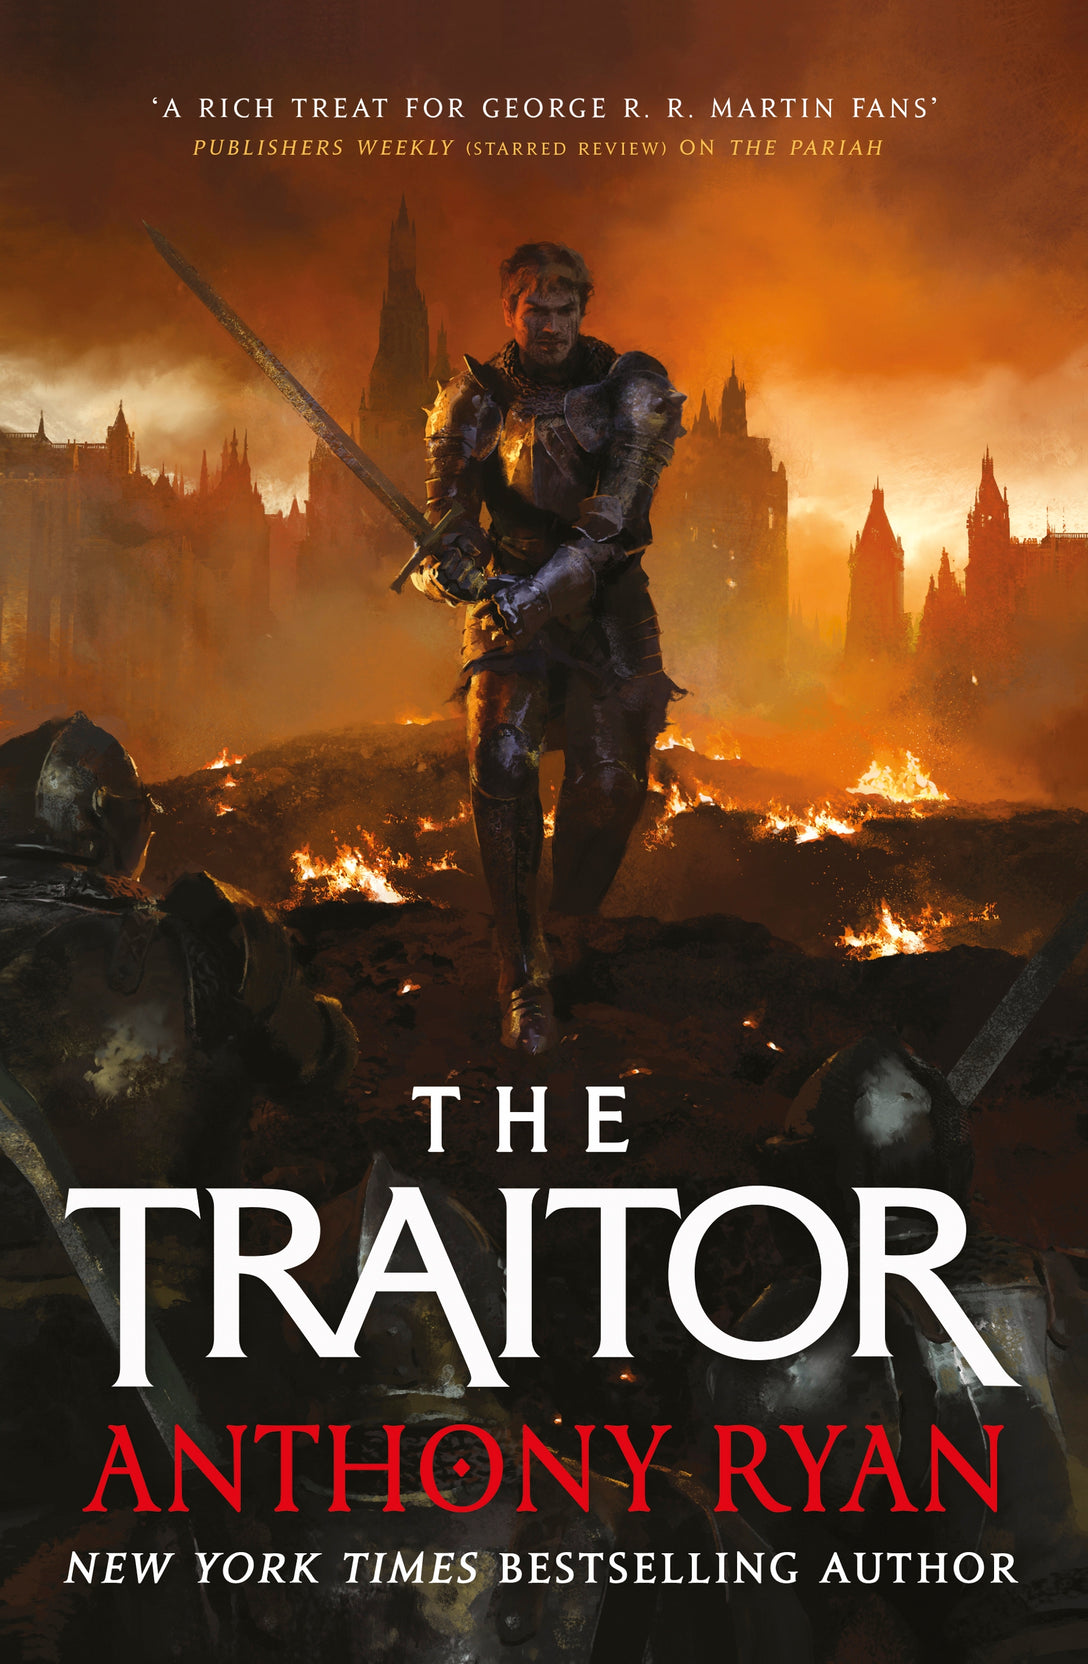 The Traitor by Anthony Ryan